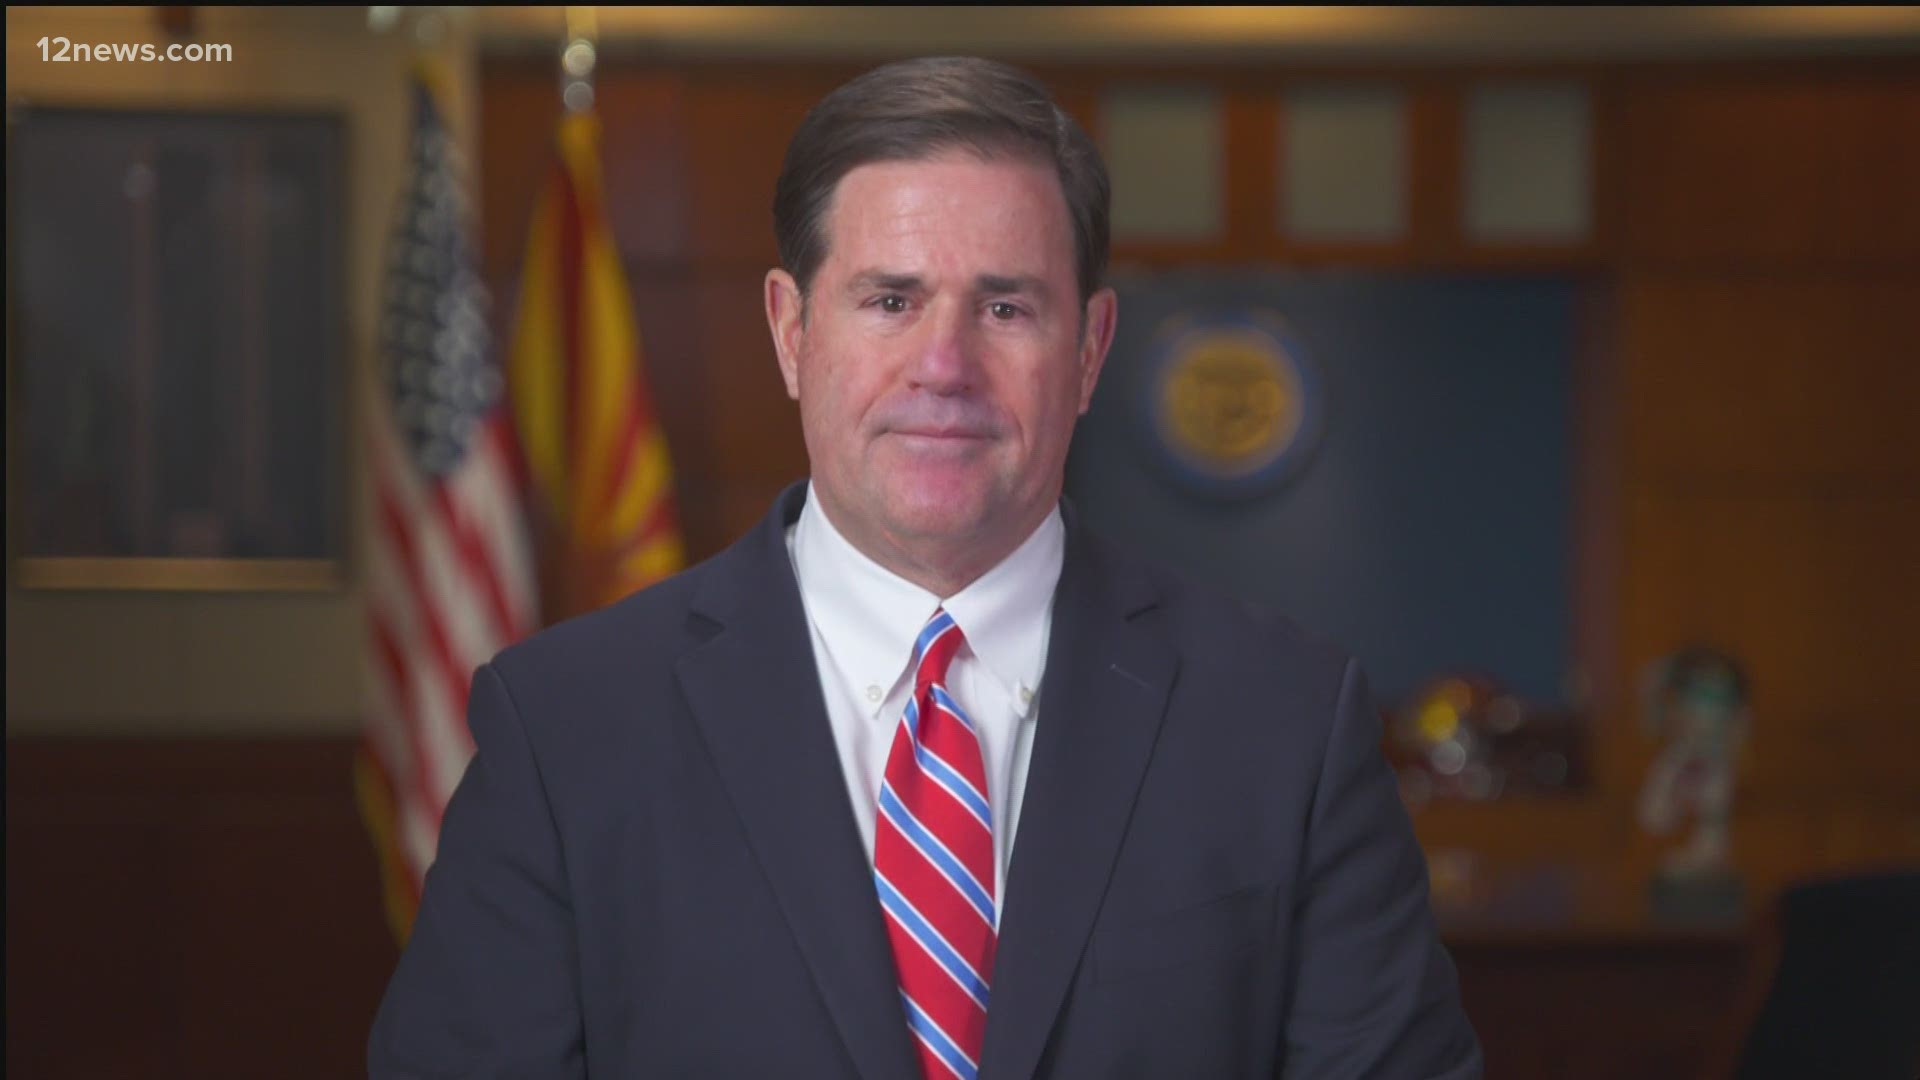 Gov. Doug Ducey was defiant in his handling of the pandemic. Arizona's top education says he's ignoring the impact COVID-19 is having on schools.